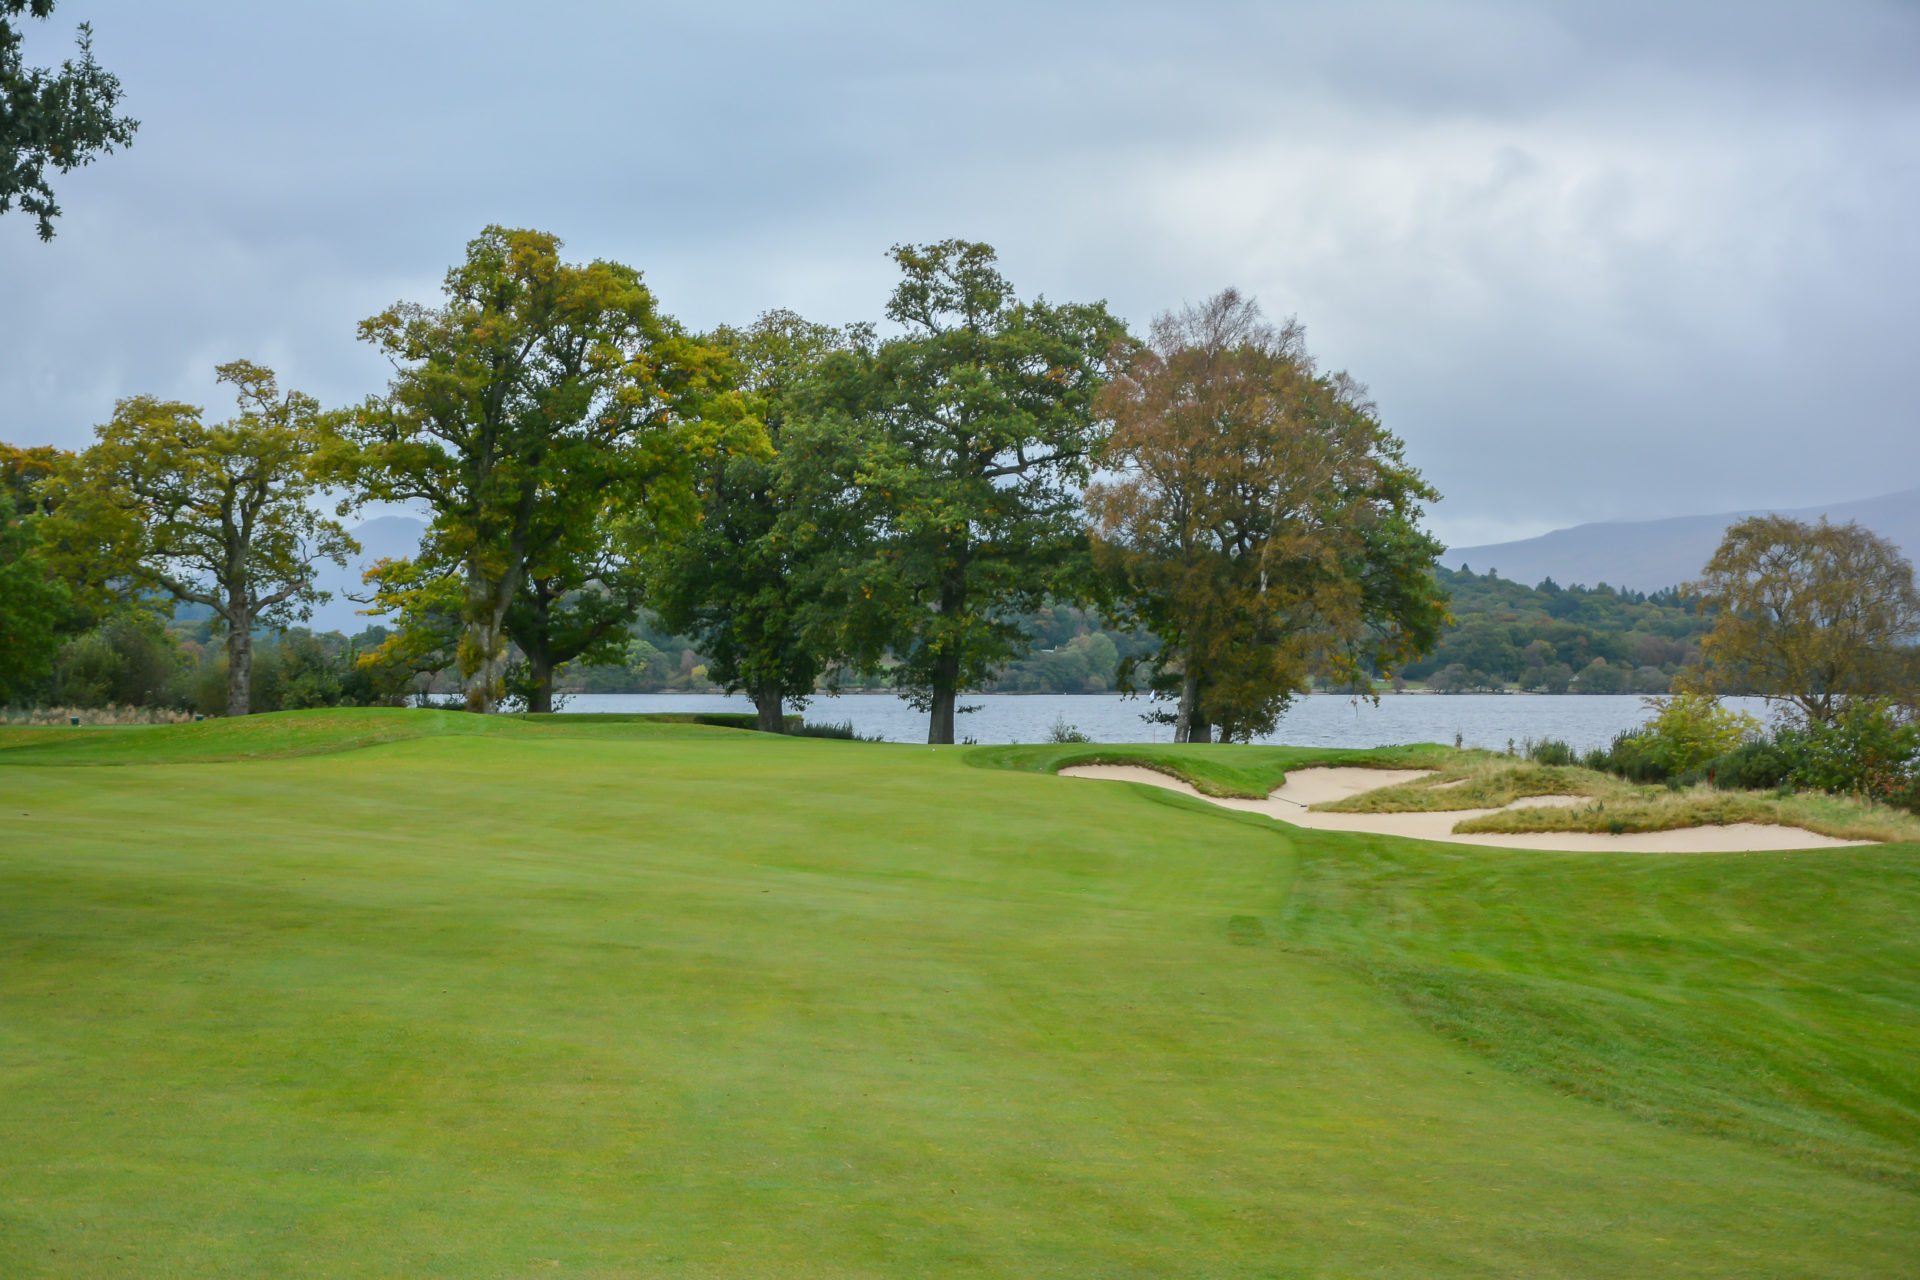 The approach shot on the 7th hole at Loch Lomond.